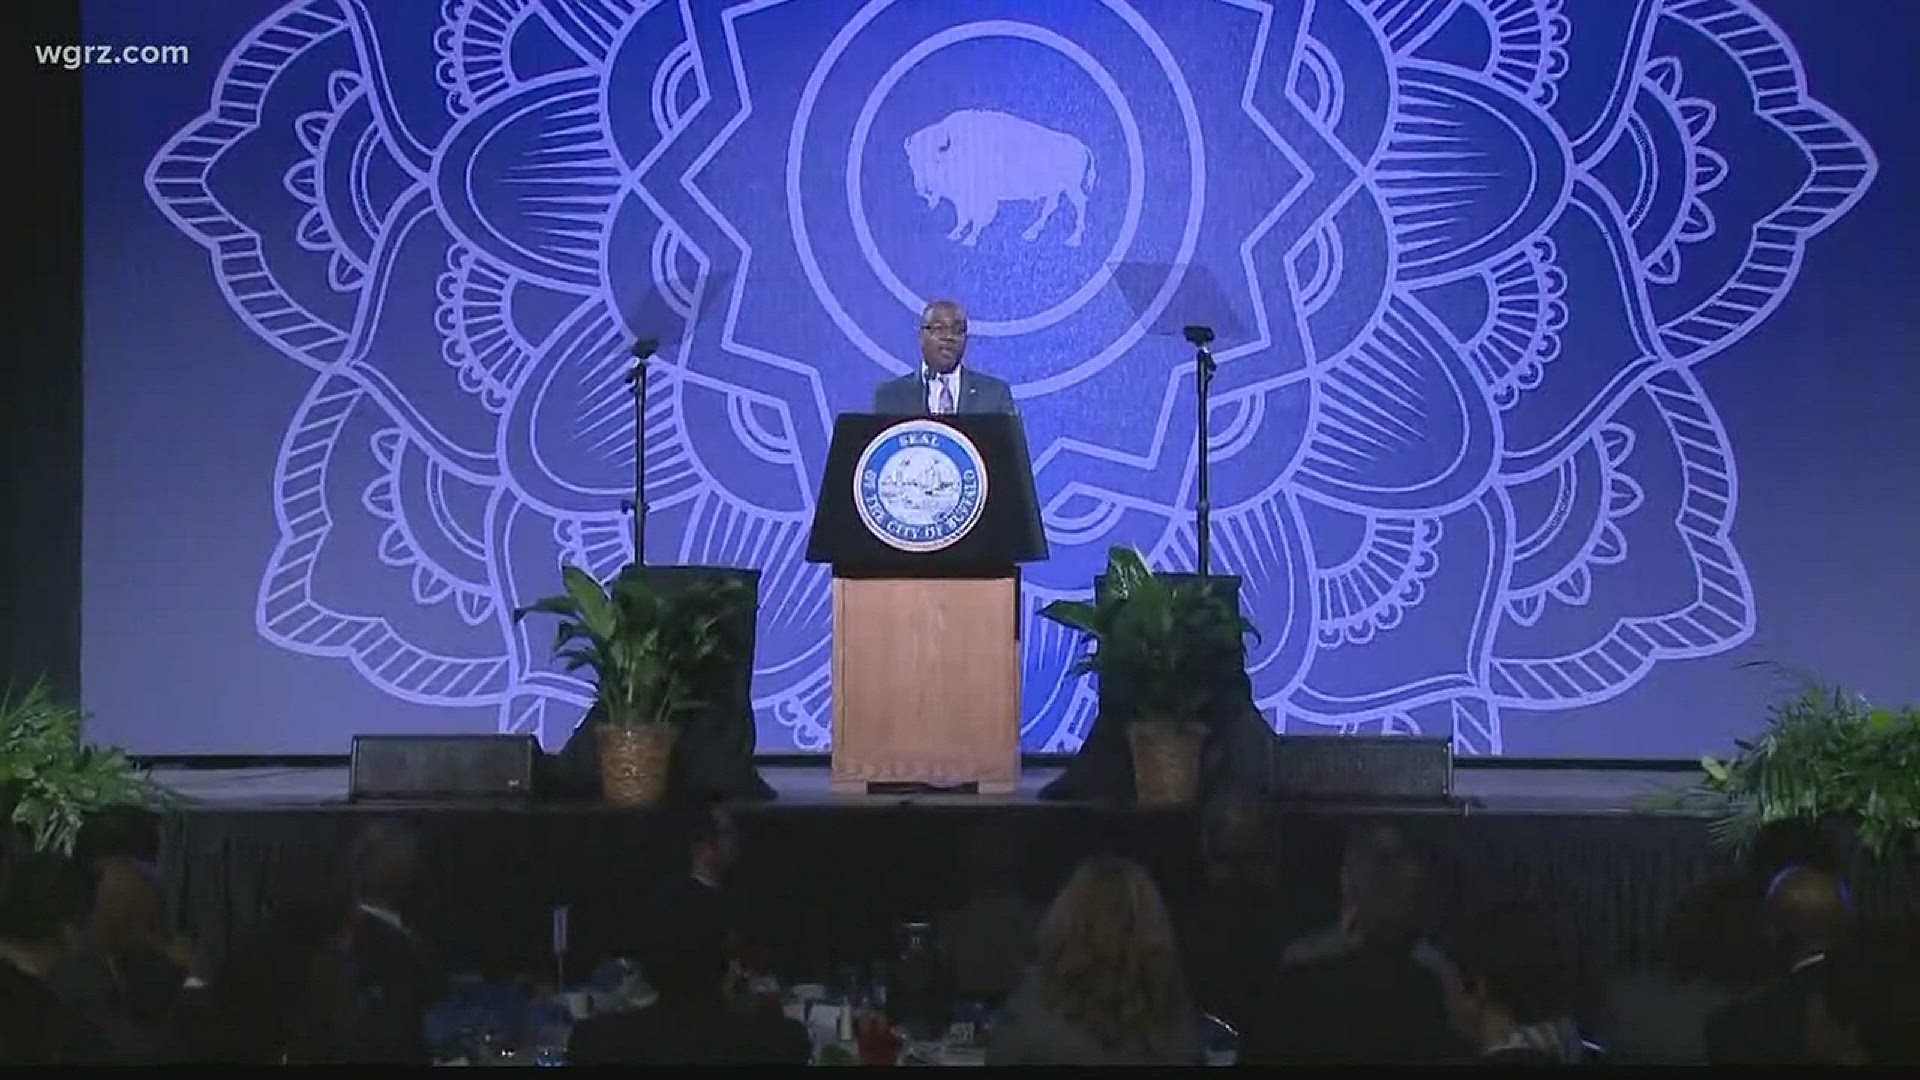 Mayor Brown's 12th State of City address